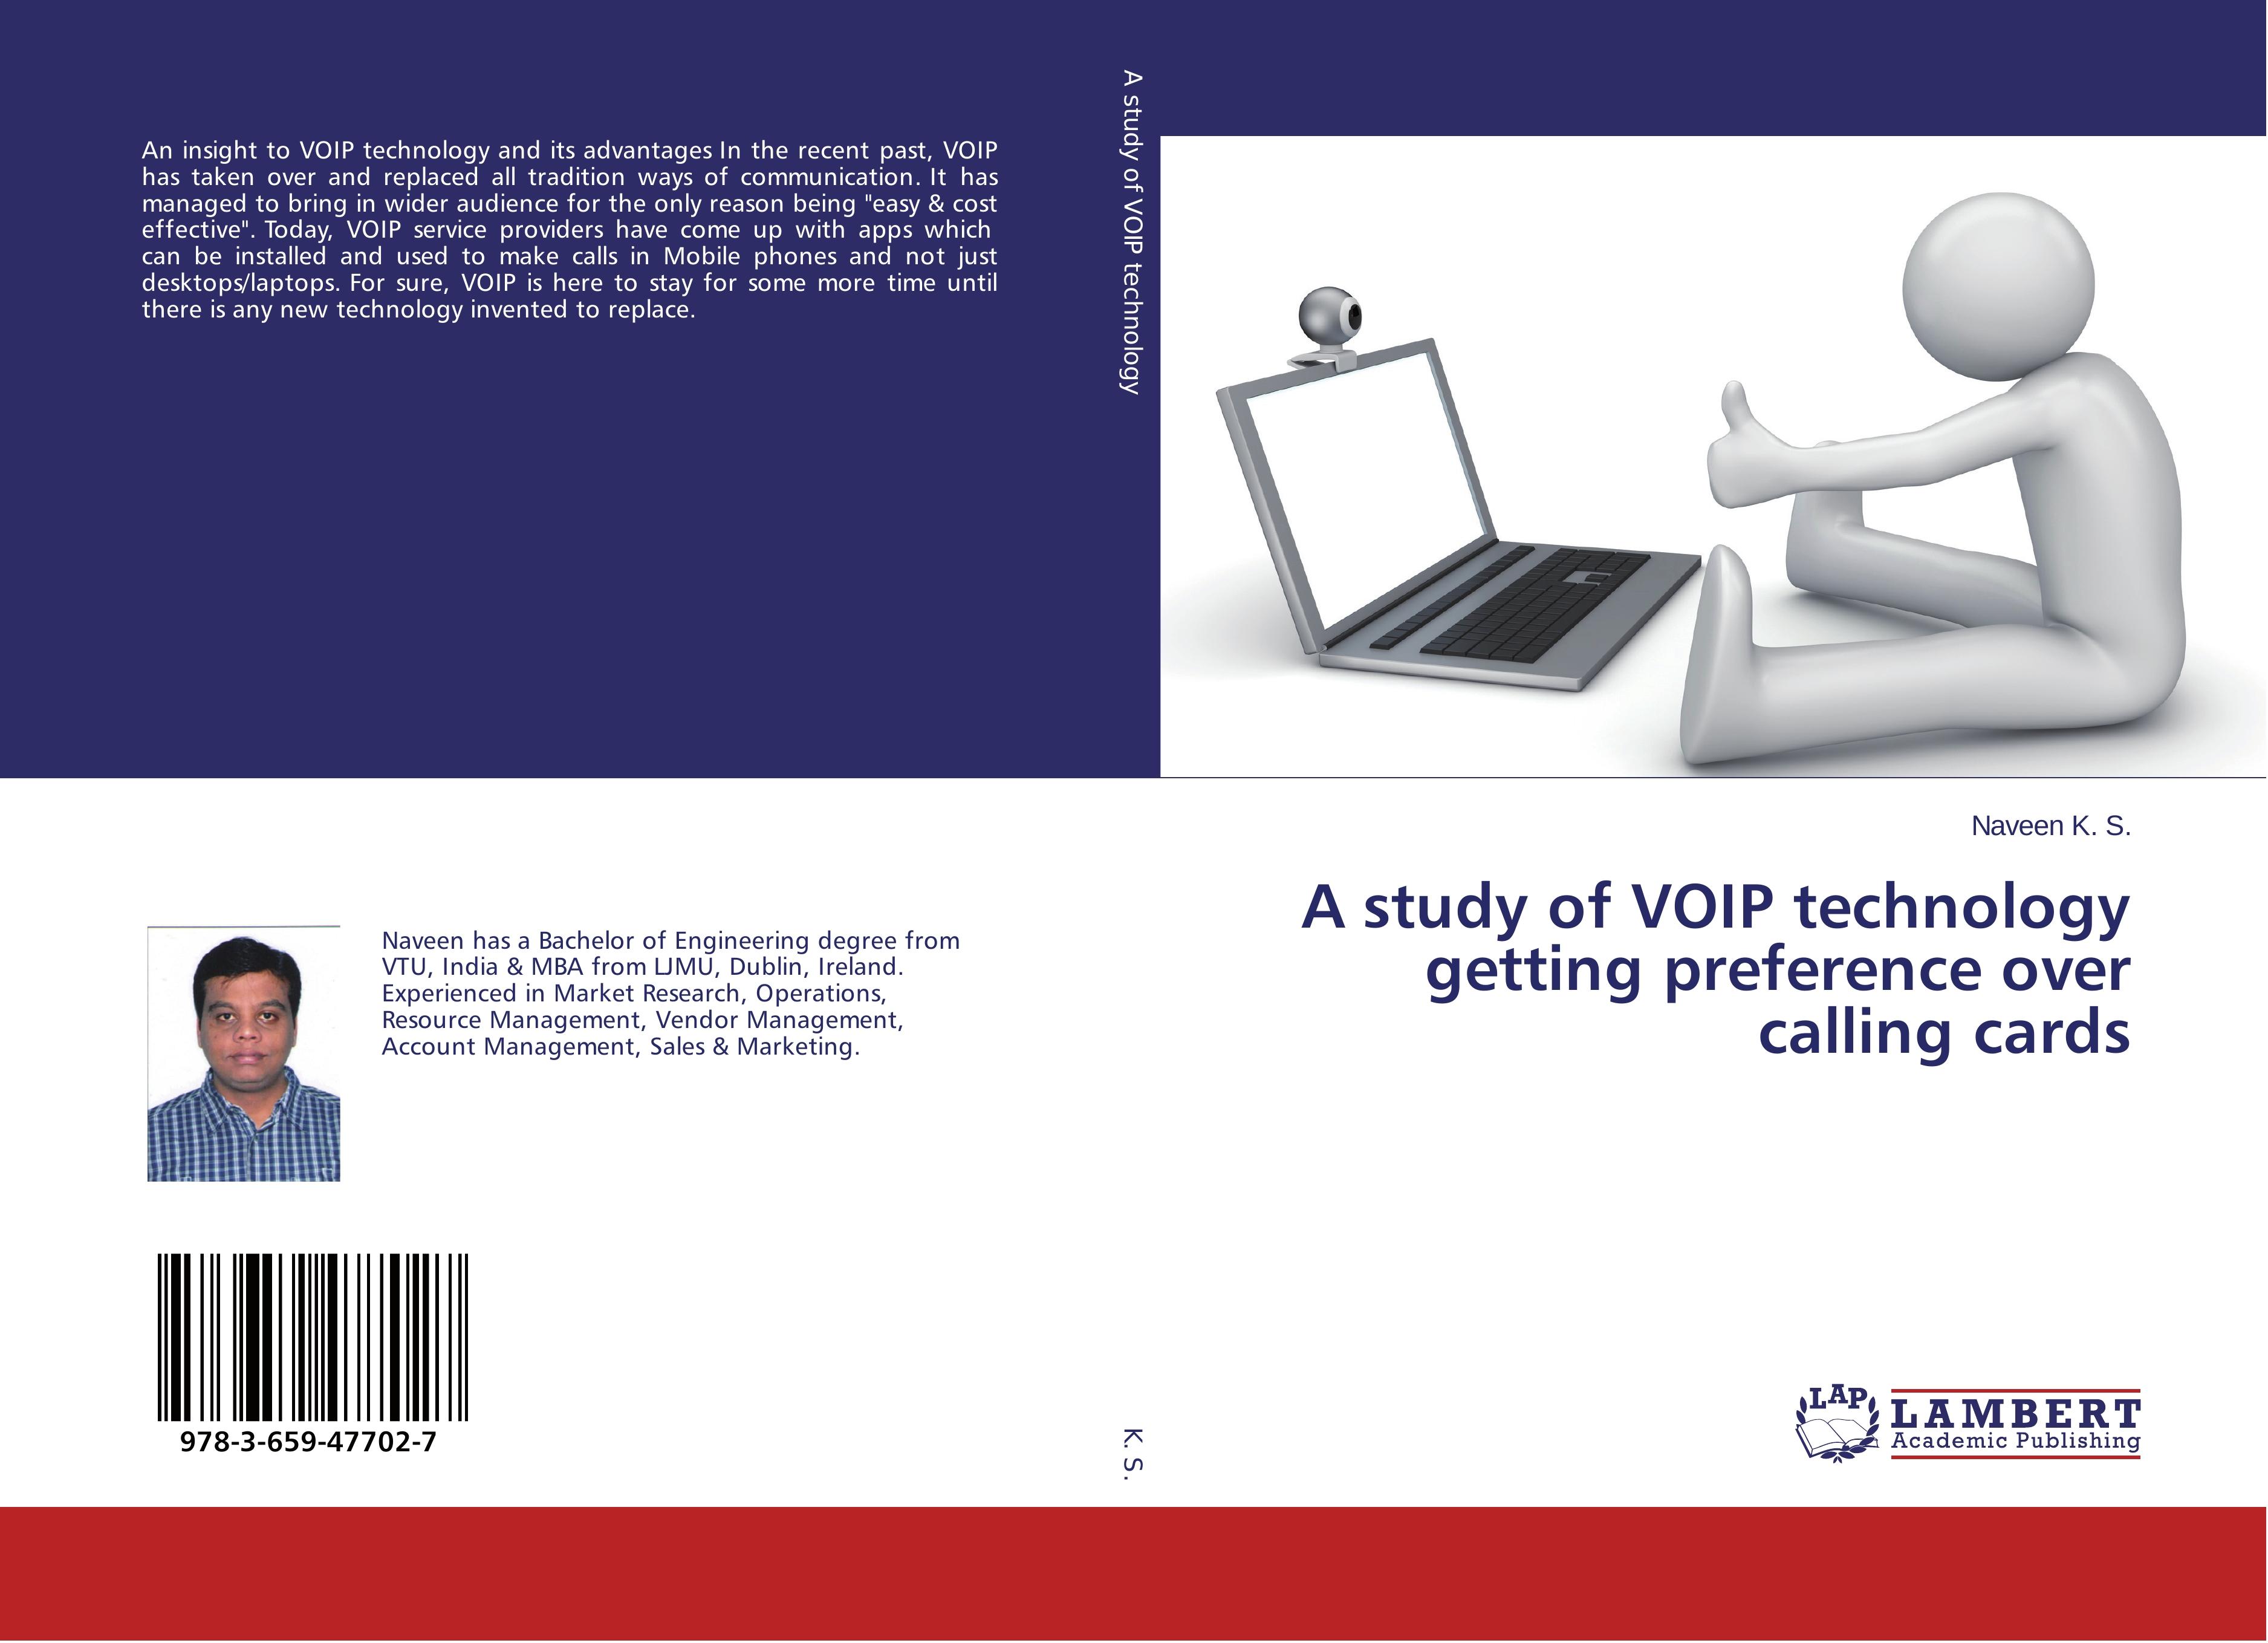 A study of VOIP technology getting preference over calling cards - Naveen K. S.